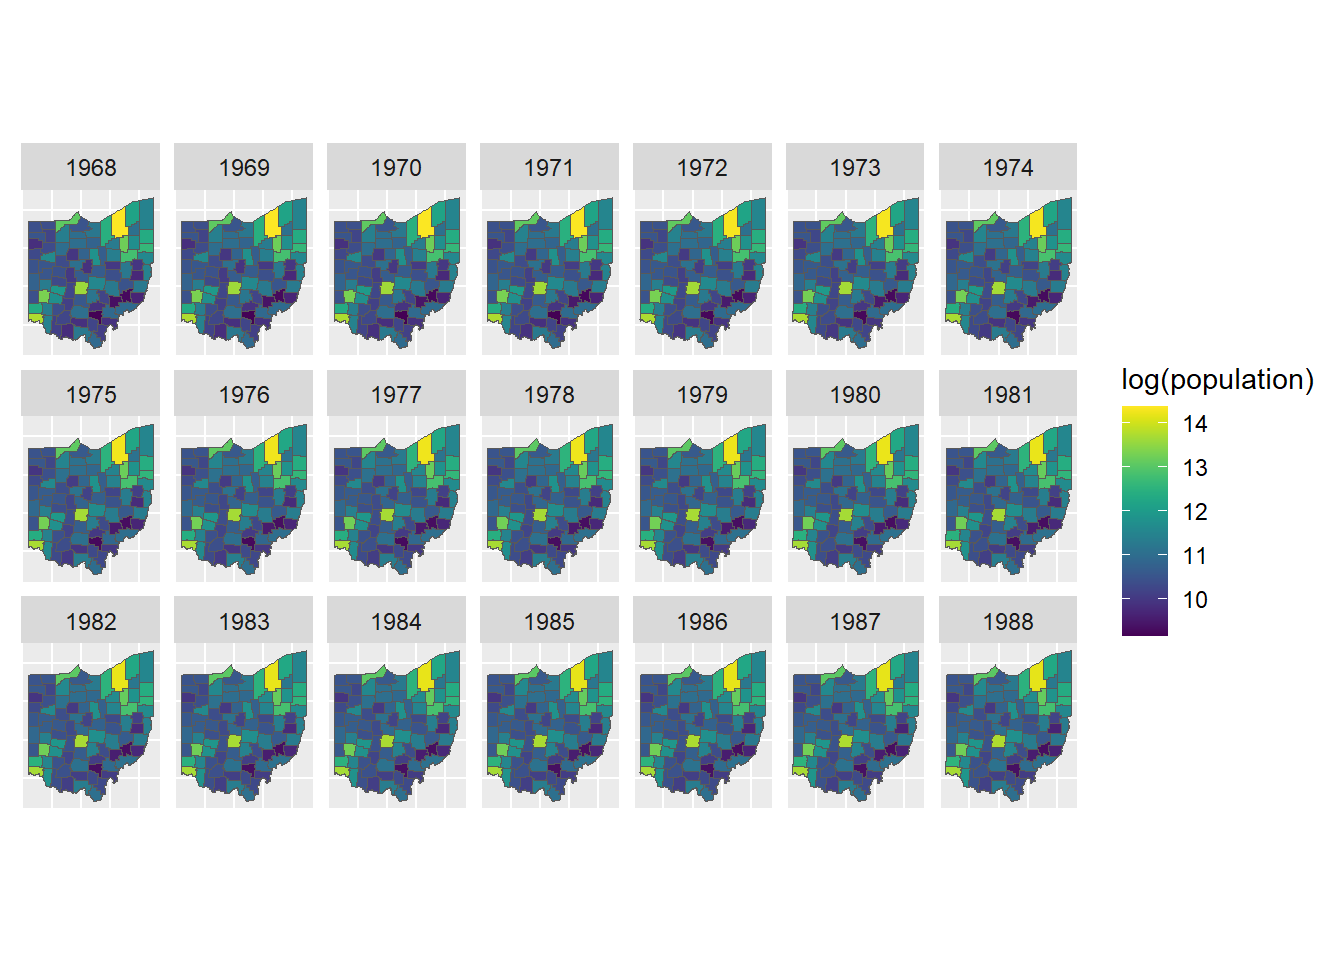 Example of spatio-temporal data. Population of the counties of Ohio, USA, from 1968 to 1988.